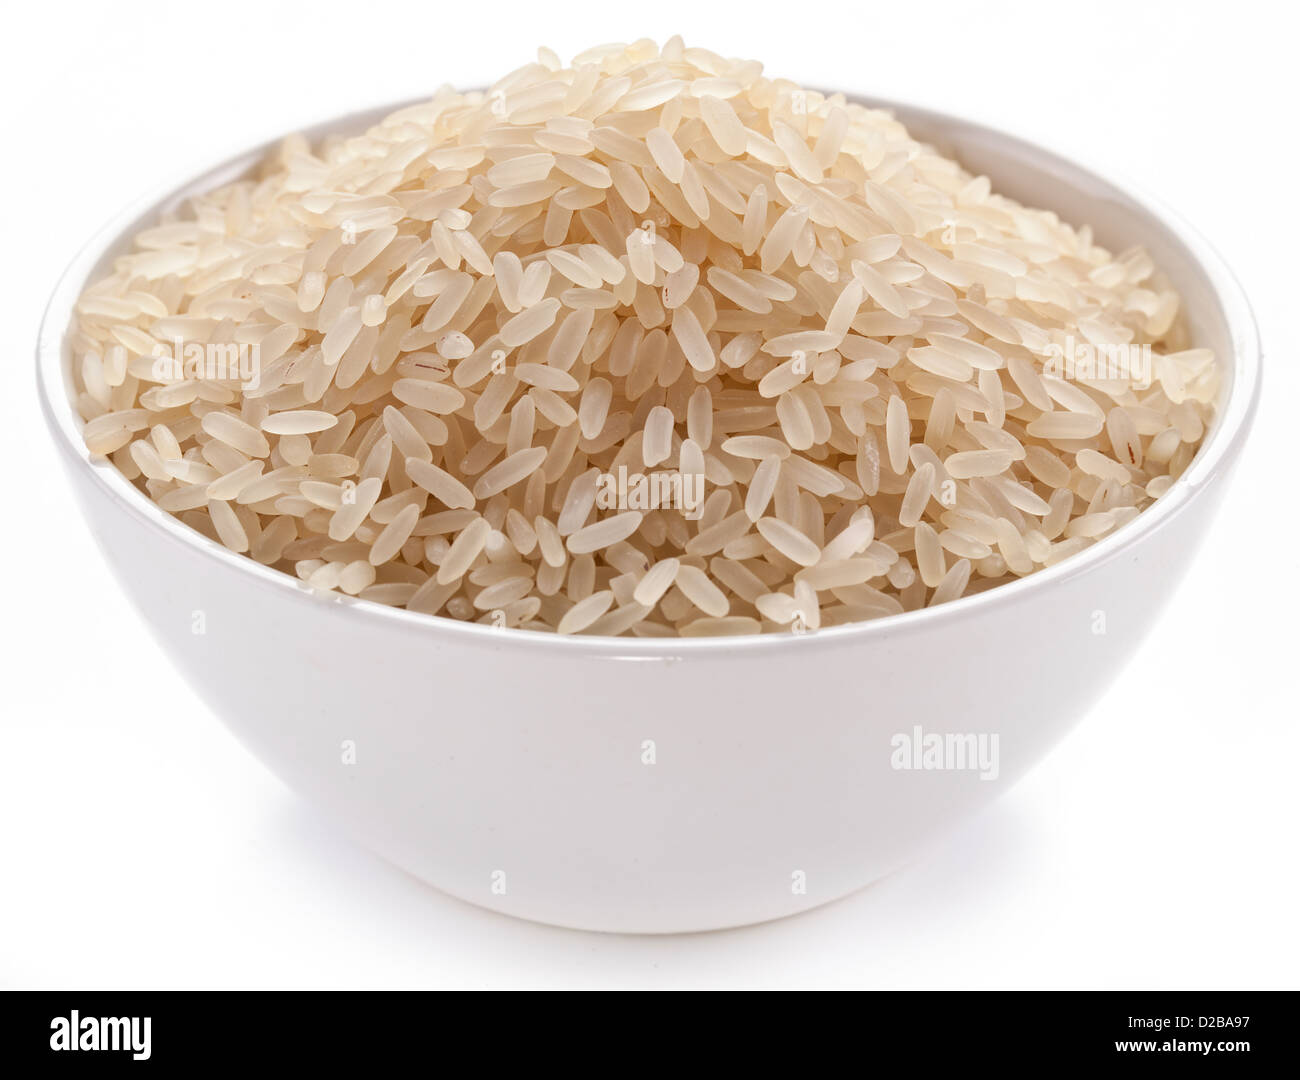 Uncooked rice in a bowl on a white background. Stock Photo